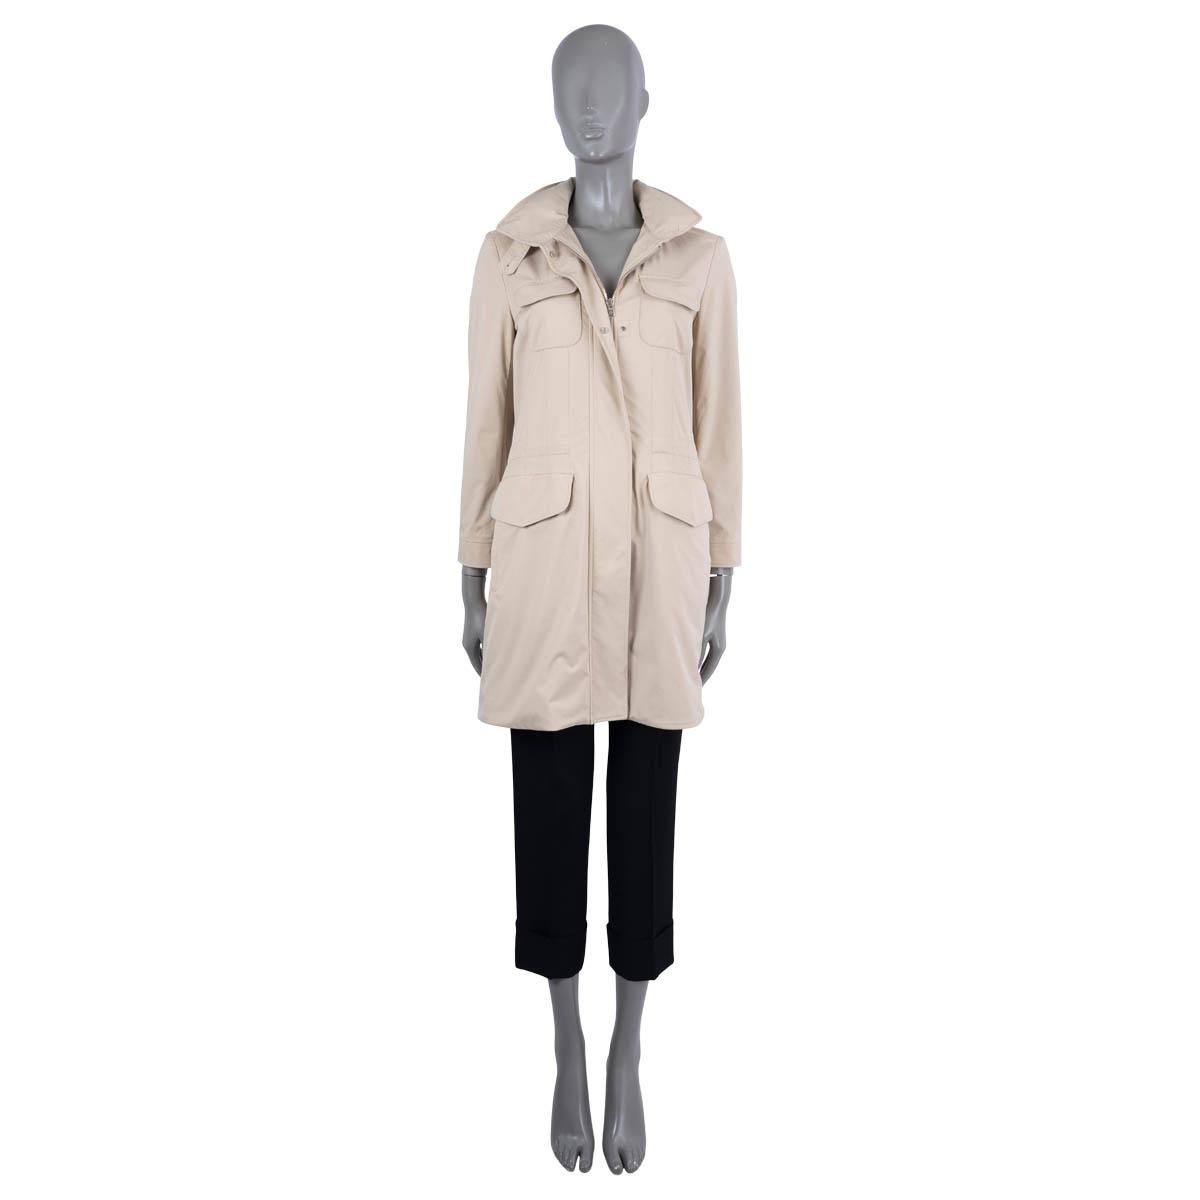 100% authentic Loro Piana traveller jacket in beige Windmate® Stretch nylon (100%).  Features Storm System® treatment making it waterproof and wind-resistant, four flap pockets on the front, a high collar with fold-away hood, a drawstring waist and